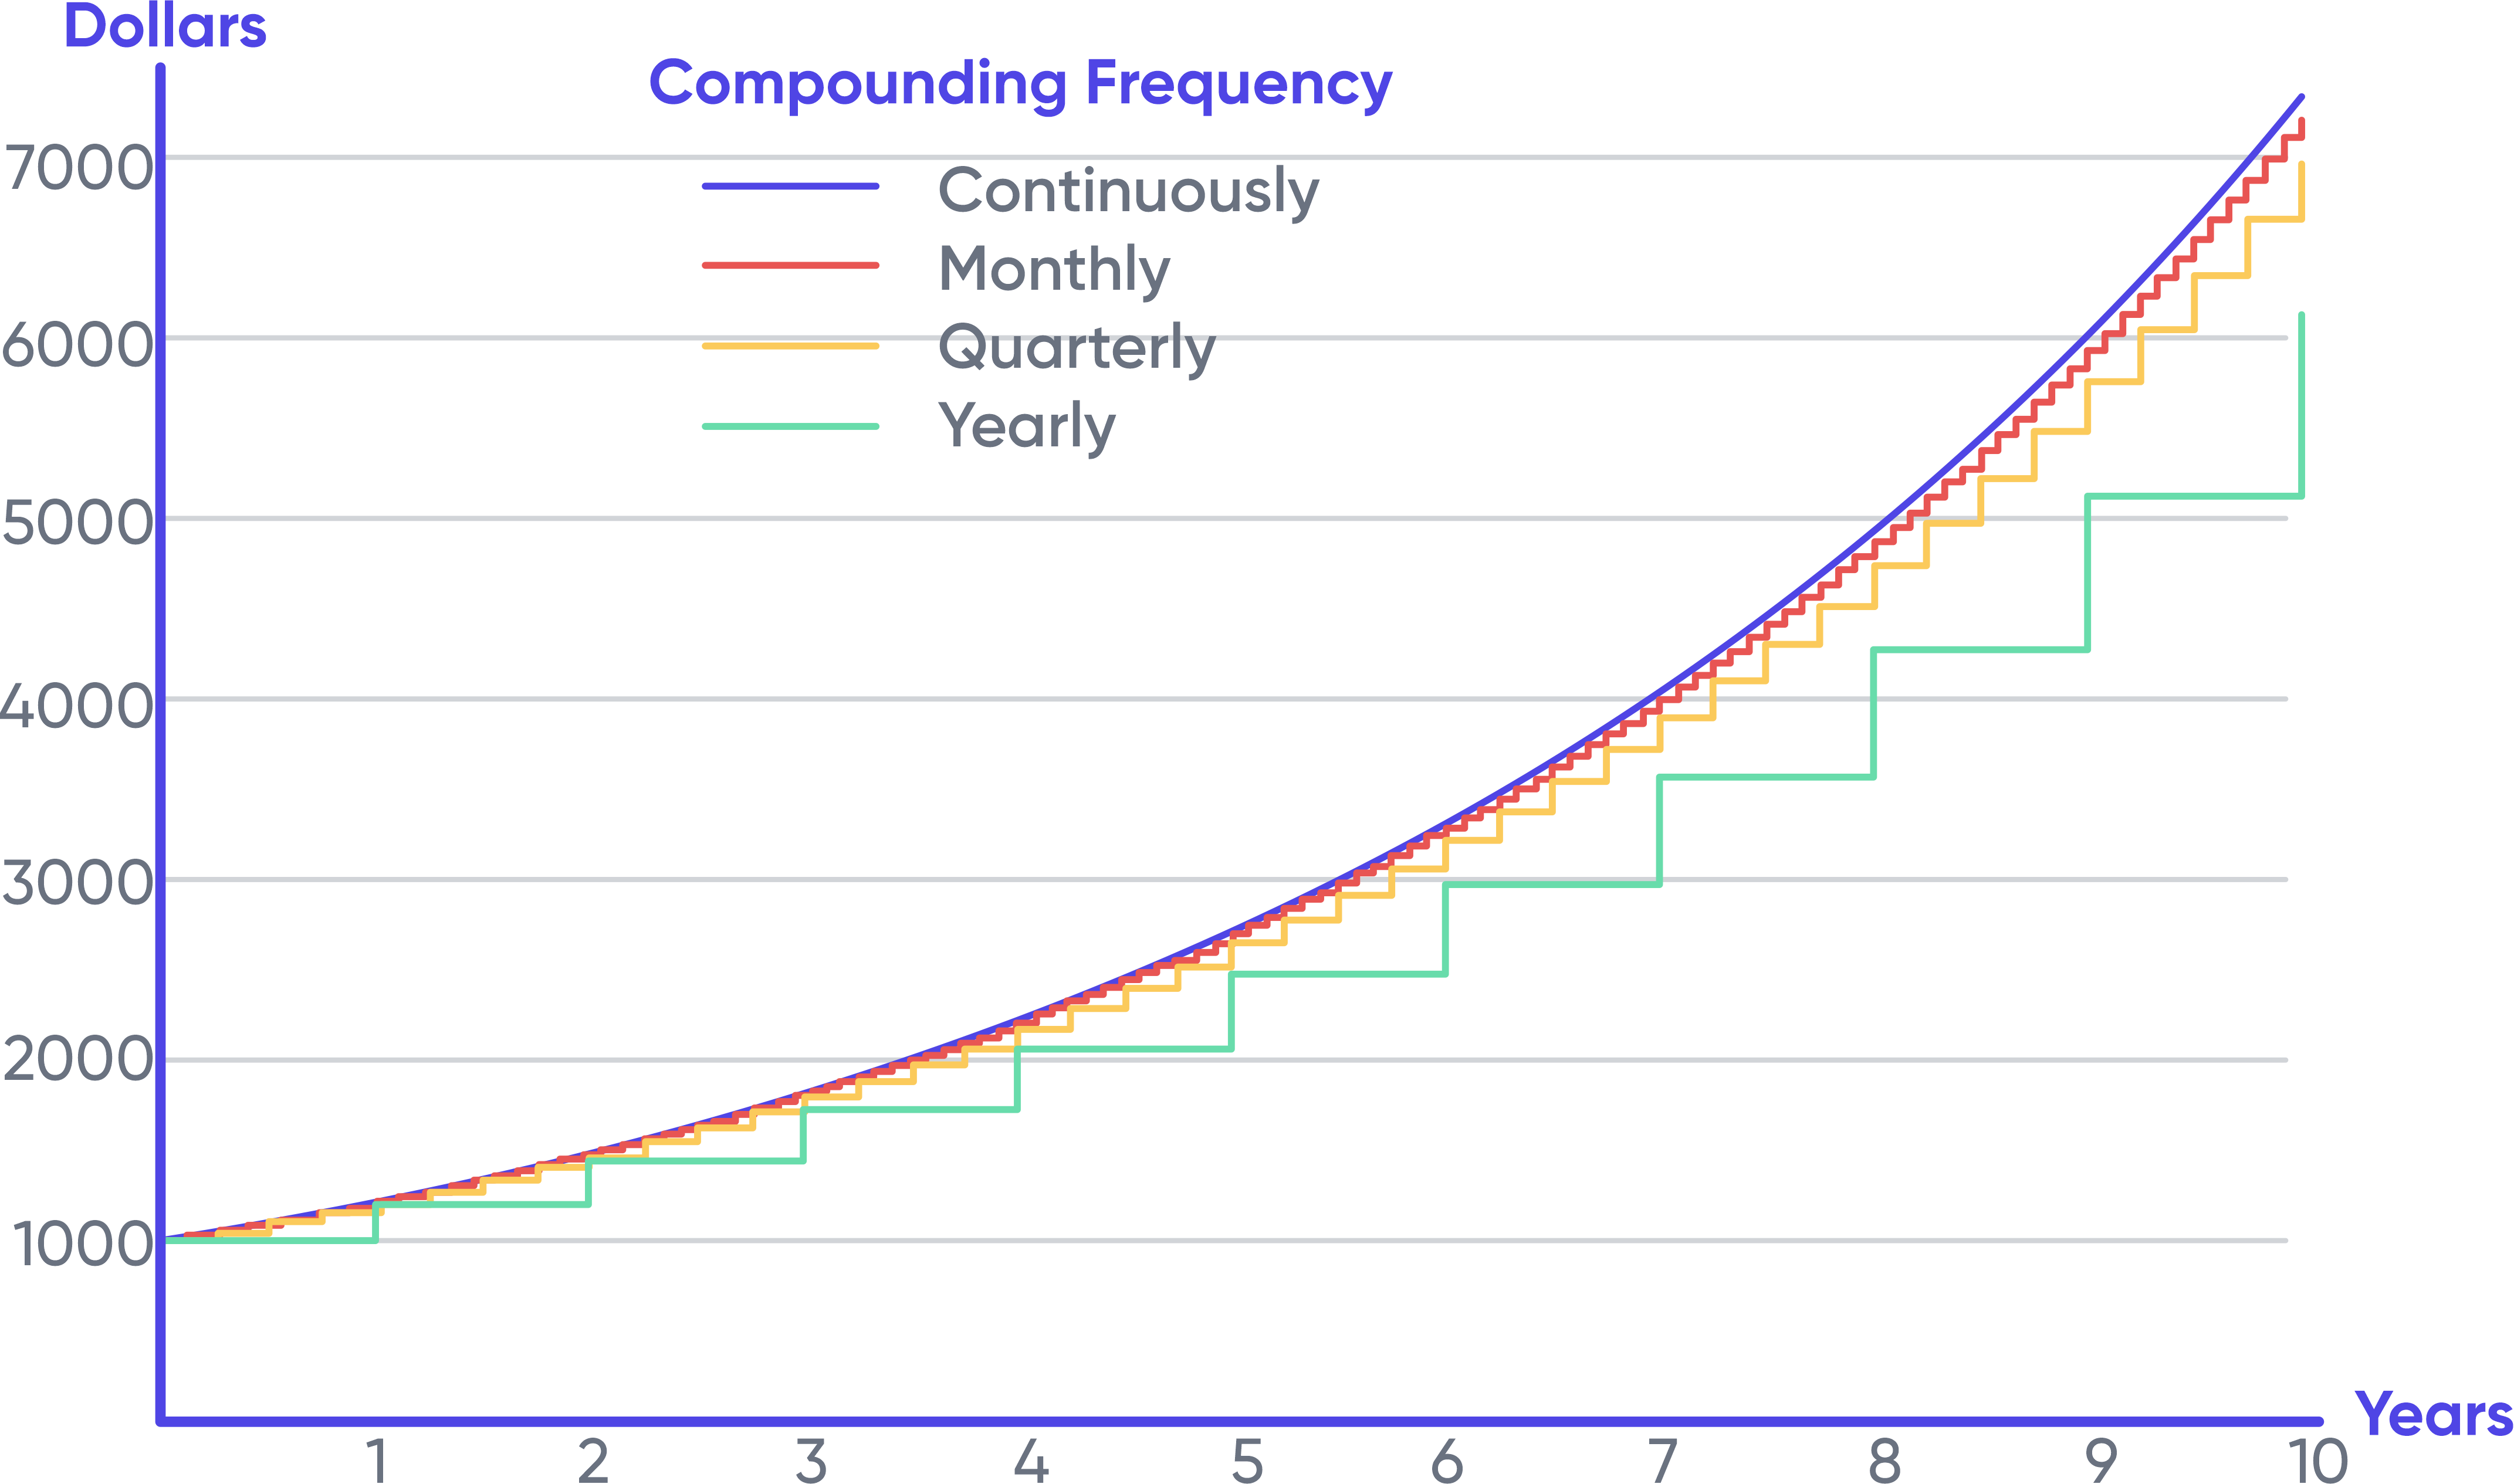 Compounding Frequency